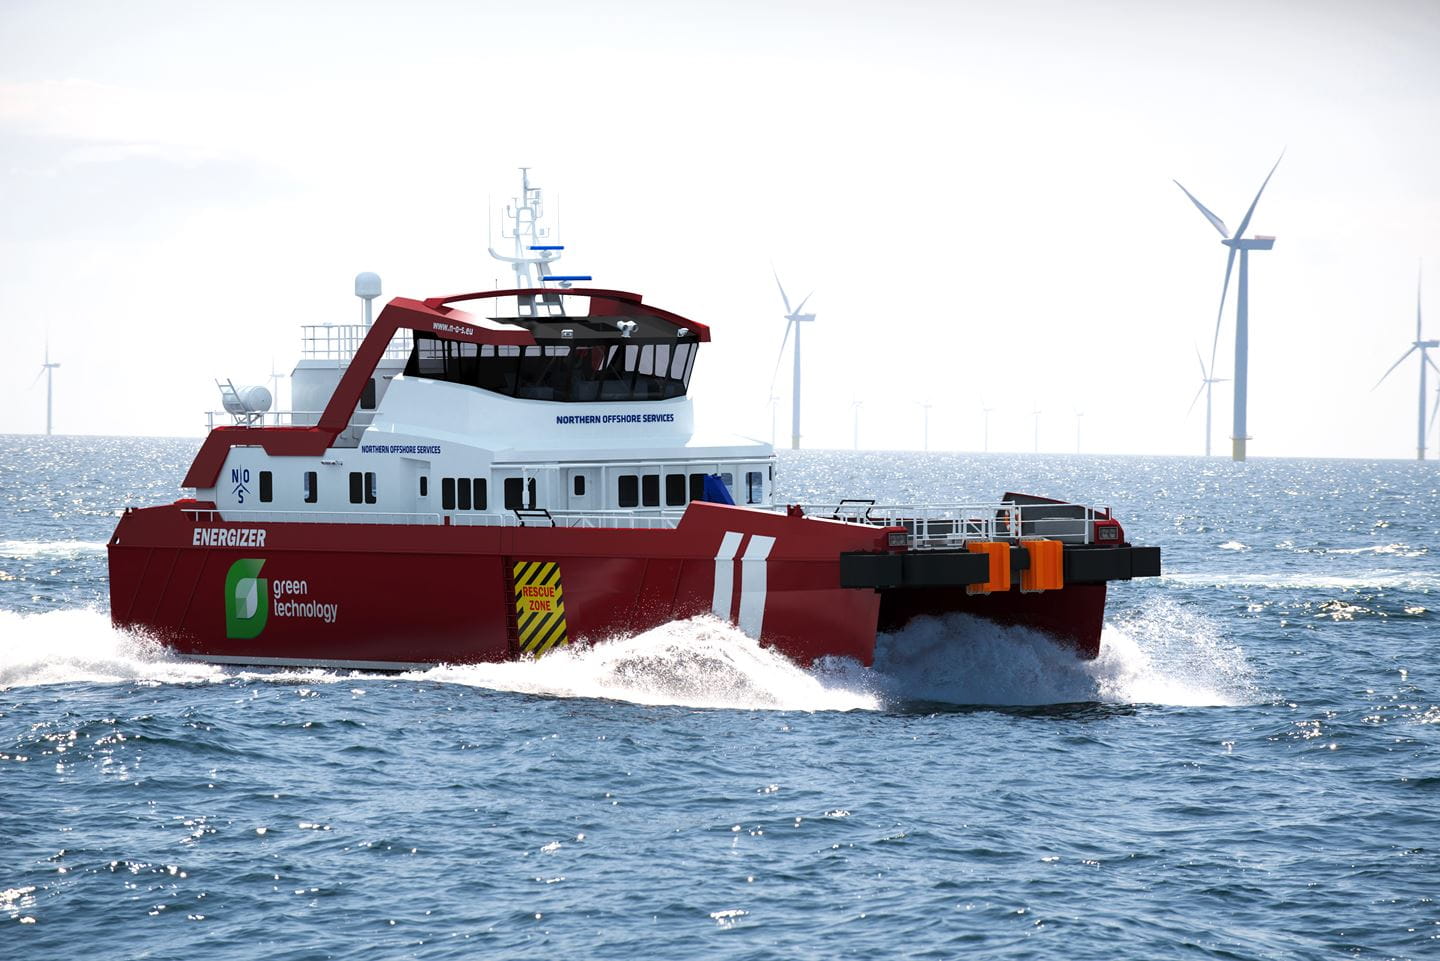 Ørsted is set to welcome three new hybrid crew transfer vessels (CTVs) to assist with the construction at Hornsea Two OWF